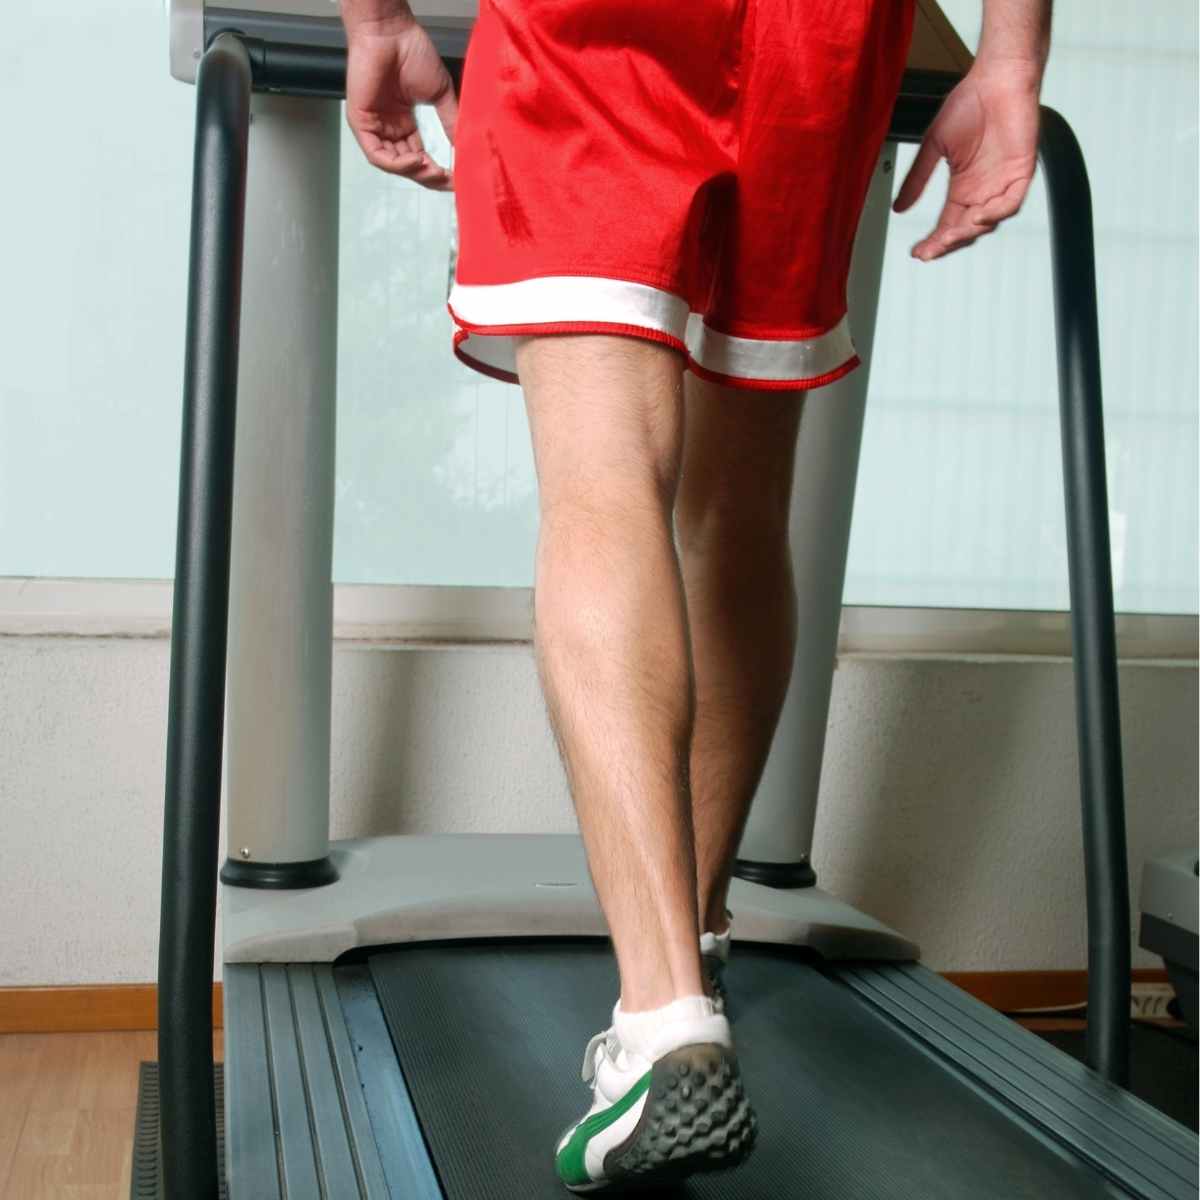 How to treadmill walk to lose weight